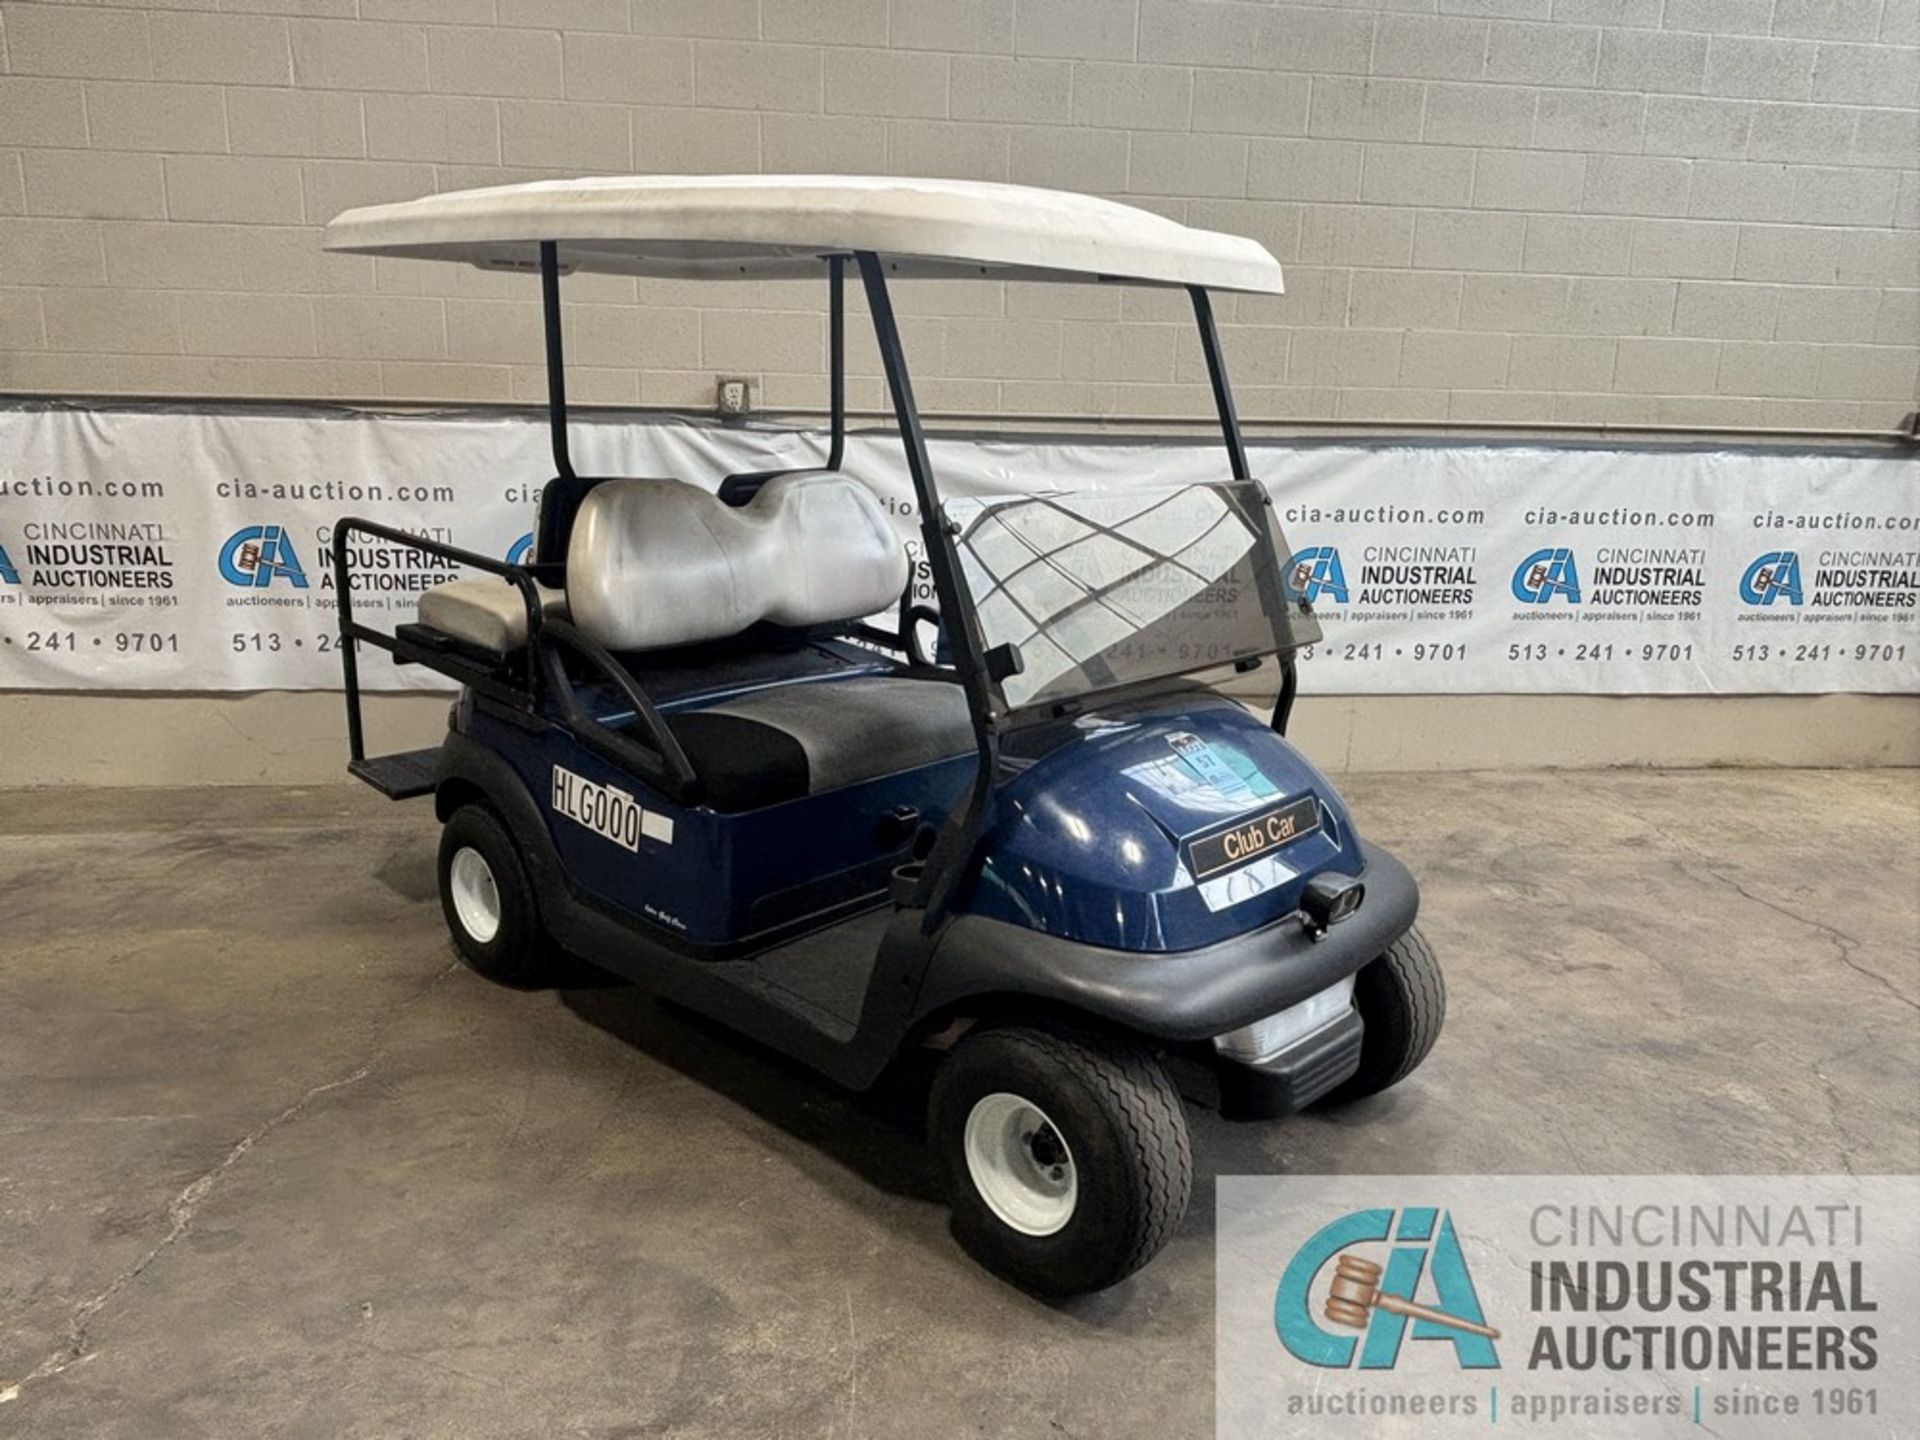 2016 CLUB CAR 4-PERSON ELECTRIC GOLF CART; S/N JH1608-623992, 48-VOLT, HOURS N/A, No Charger